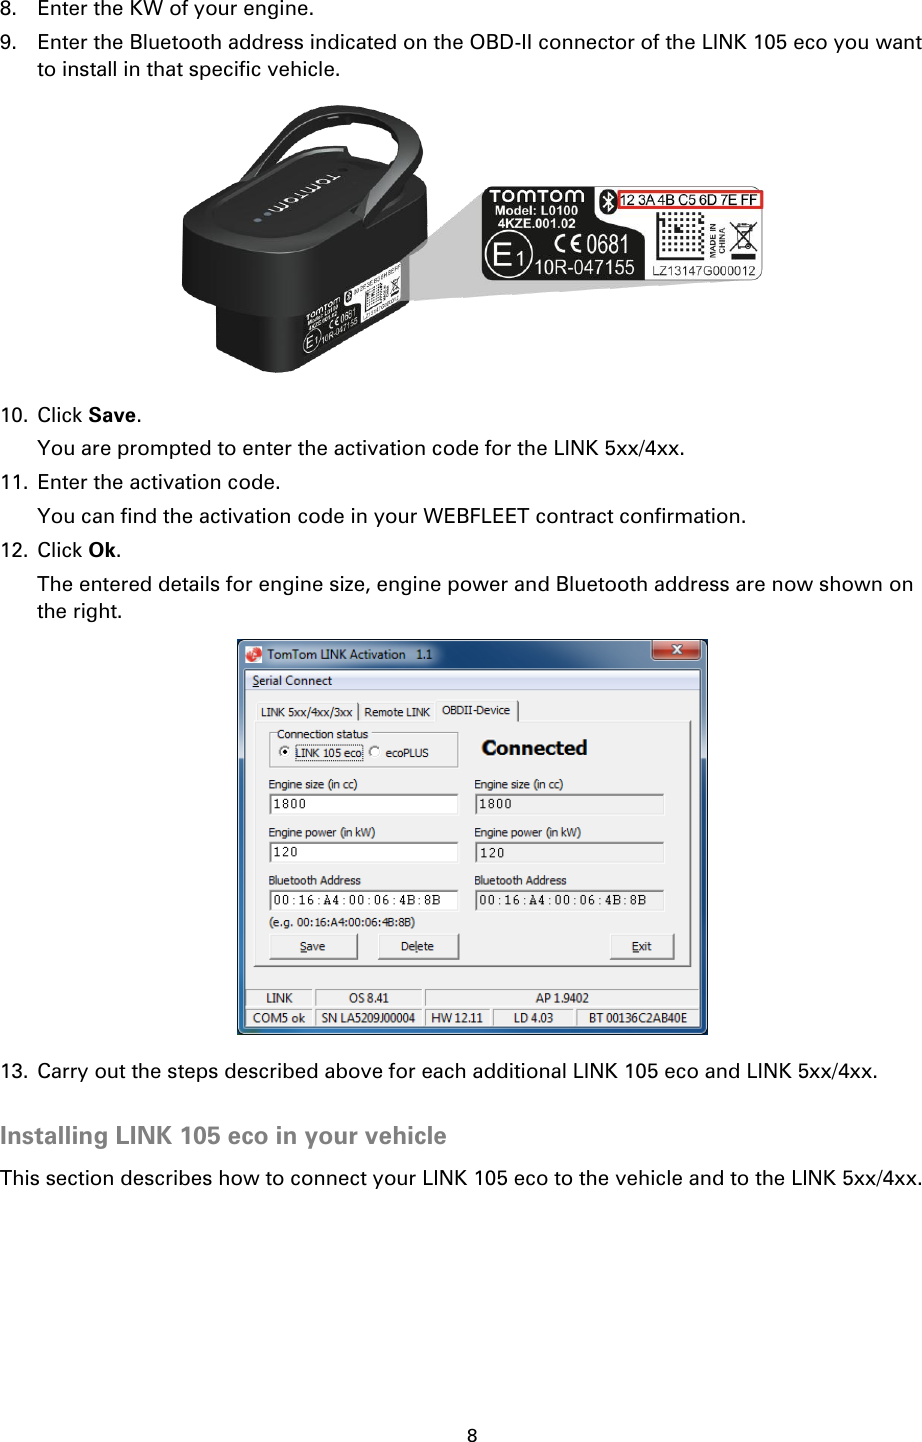 8    8. Enter the KW of your engine. 9. Enter the Bluetooth address indicated on the OBD-II connector of the LINK 105 eco you want to install in that specific vehicle.  10. Click Save. You are prompted to enter the activation code for the LINK 5xx/4xx. 11. Enter the activation code. You can find the activation code in your WEBFLEET contract confirmation. 12. Click Ok. The entered details for engine size, engine power and Bluetooth address are now shown on the right.  13. Carry out the steps described above for each additional LINK 105 eco and LINK 5xx/4xx.  Installing LINK 105 eco in your vehicle This section describes how to connect your LINK 105 eco to the vehicle and to the LINK 5xx/4xx. 